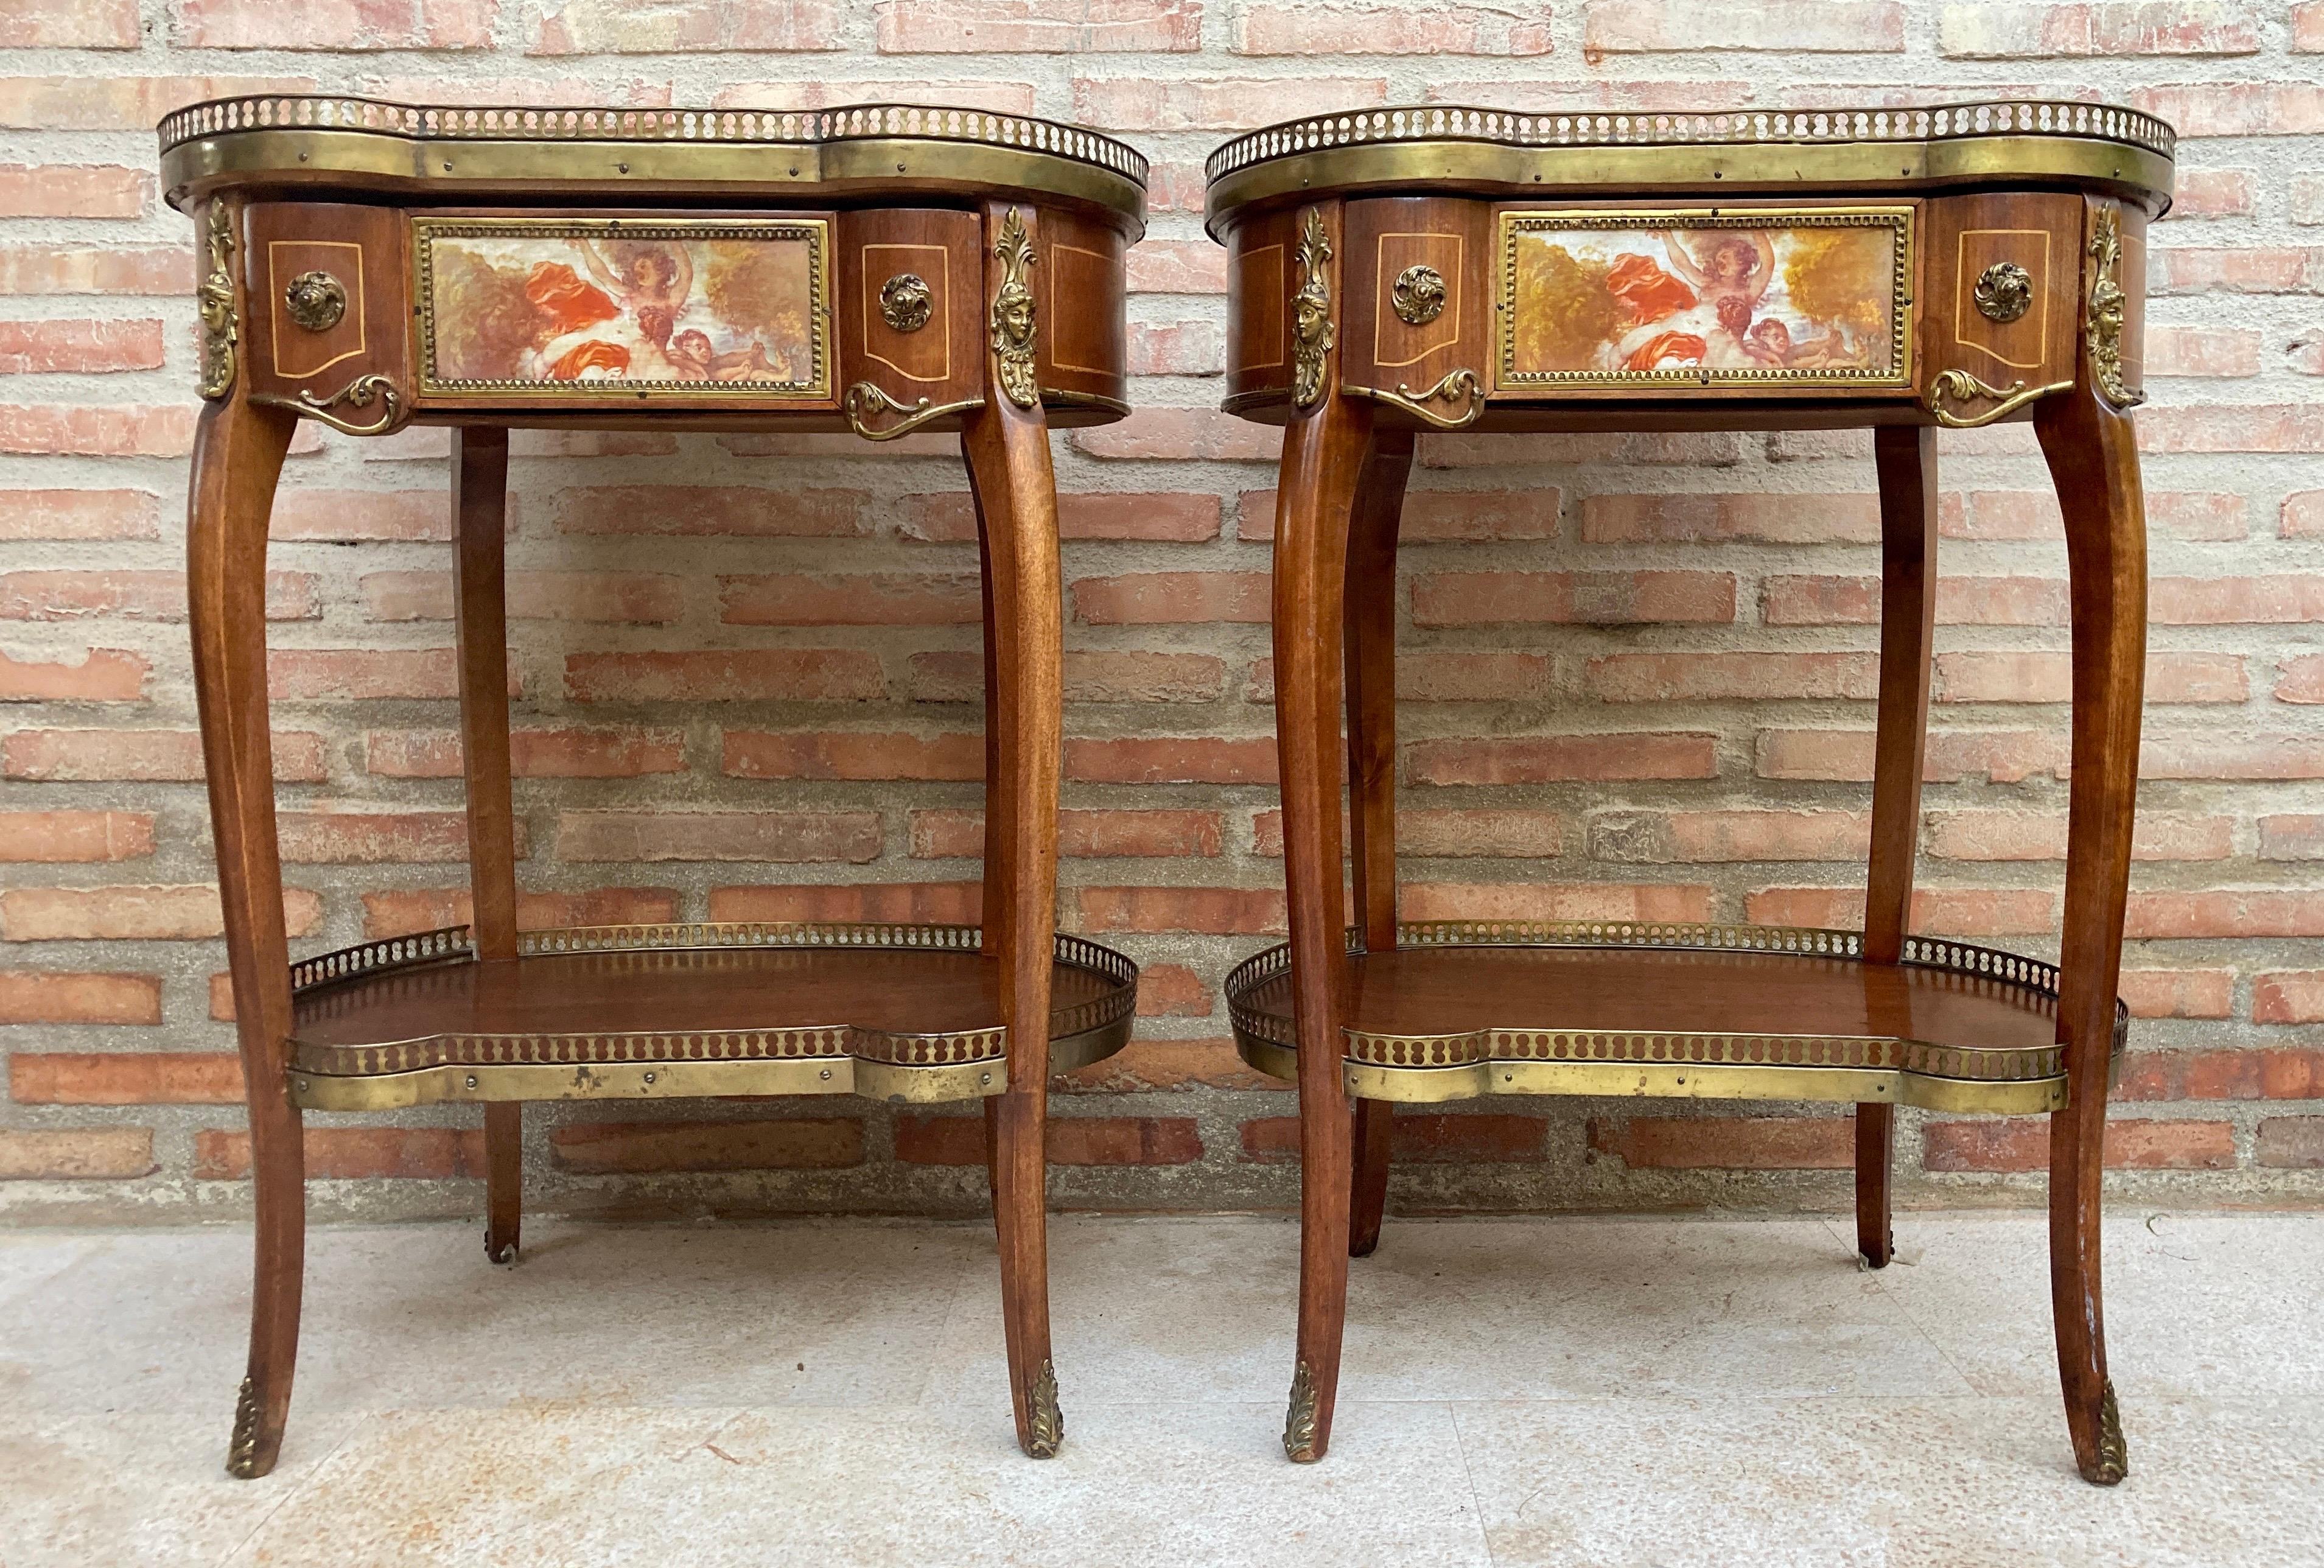 Pair of kidney-shaped Transition style nightstands in carved wood with gilt bronze appliqués and gallery. Two heights and waist drawer. Marble countertop. Measurements: 70x35x54 cm. 
design time From 1920 to 1949 
Year 1940 
production period